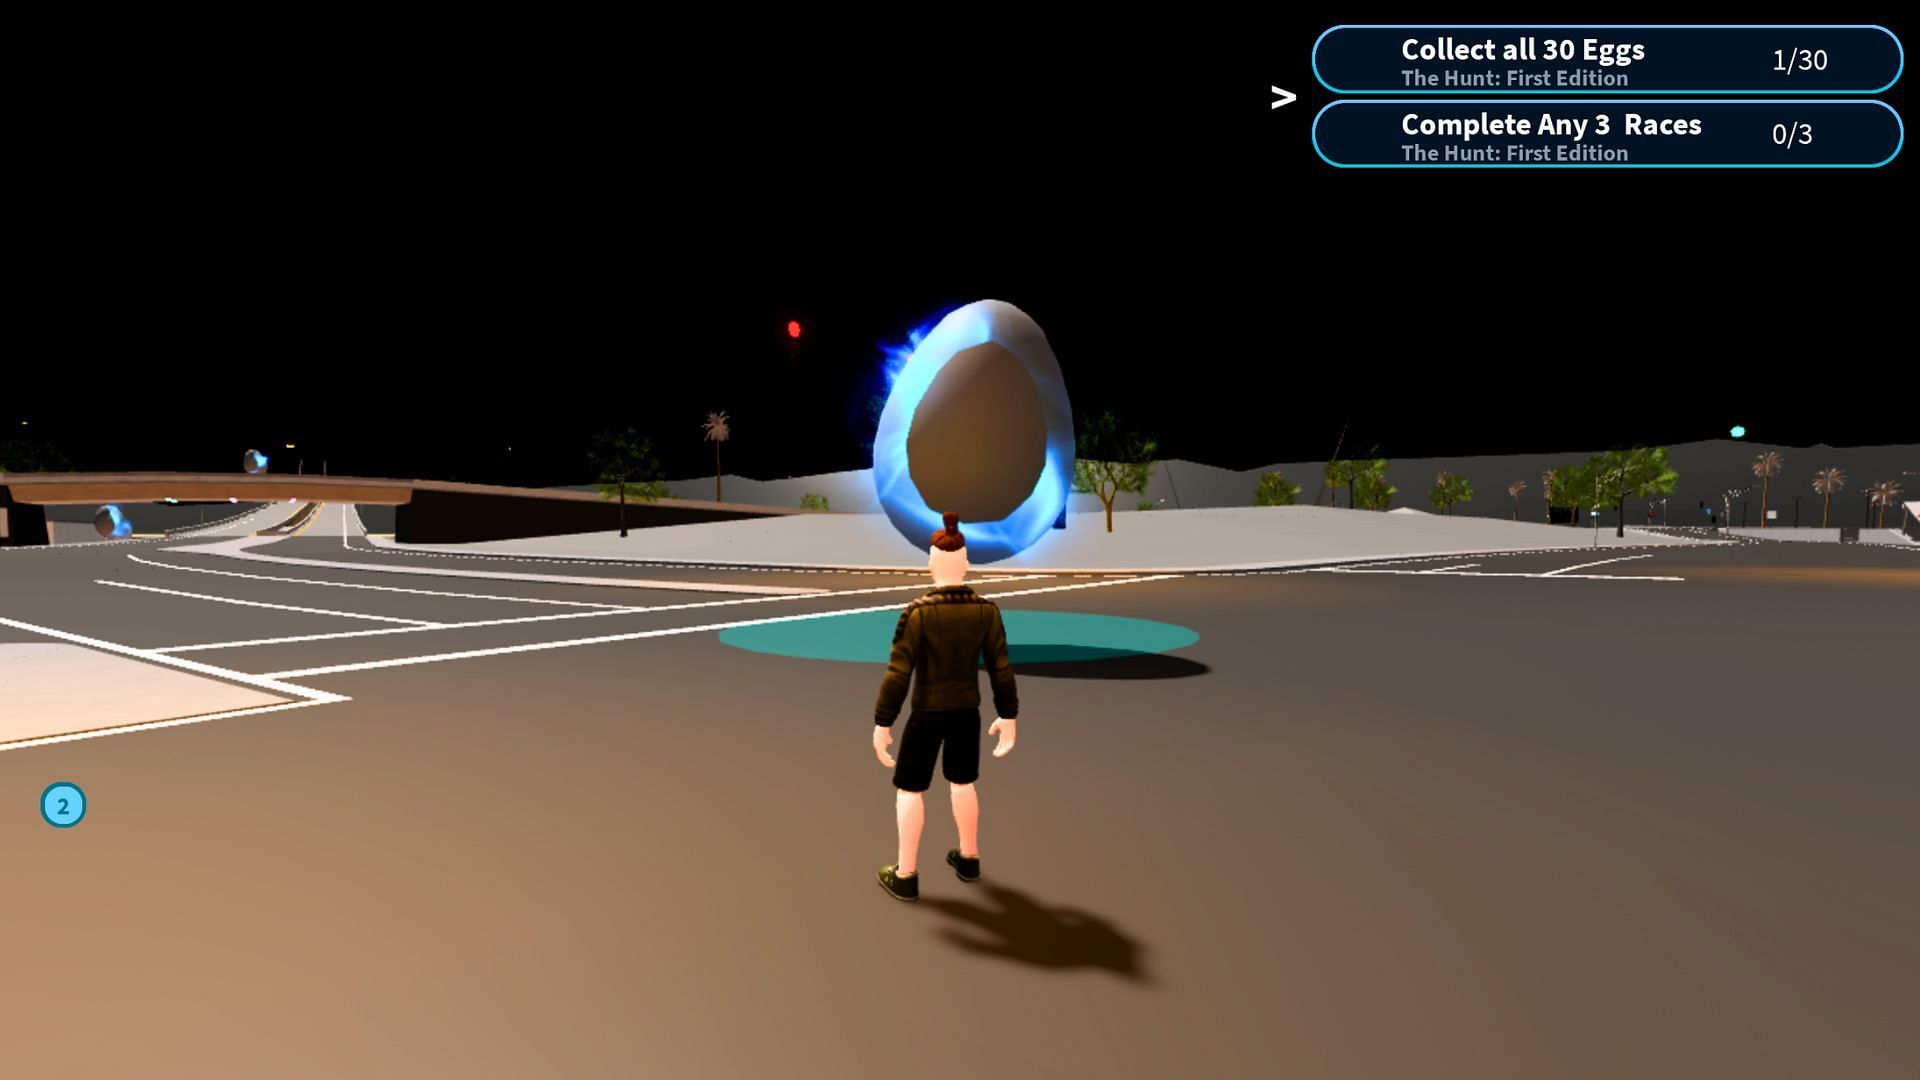 Collect eggs in the game (Image via Roblox)